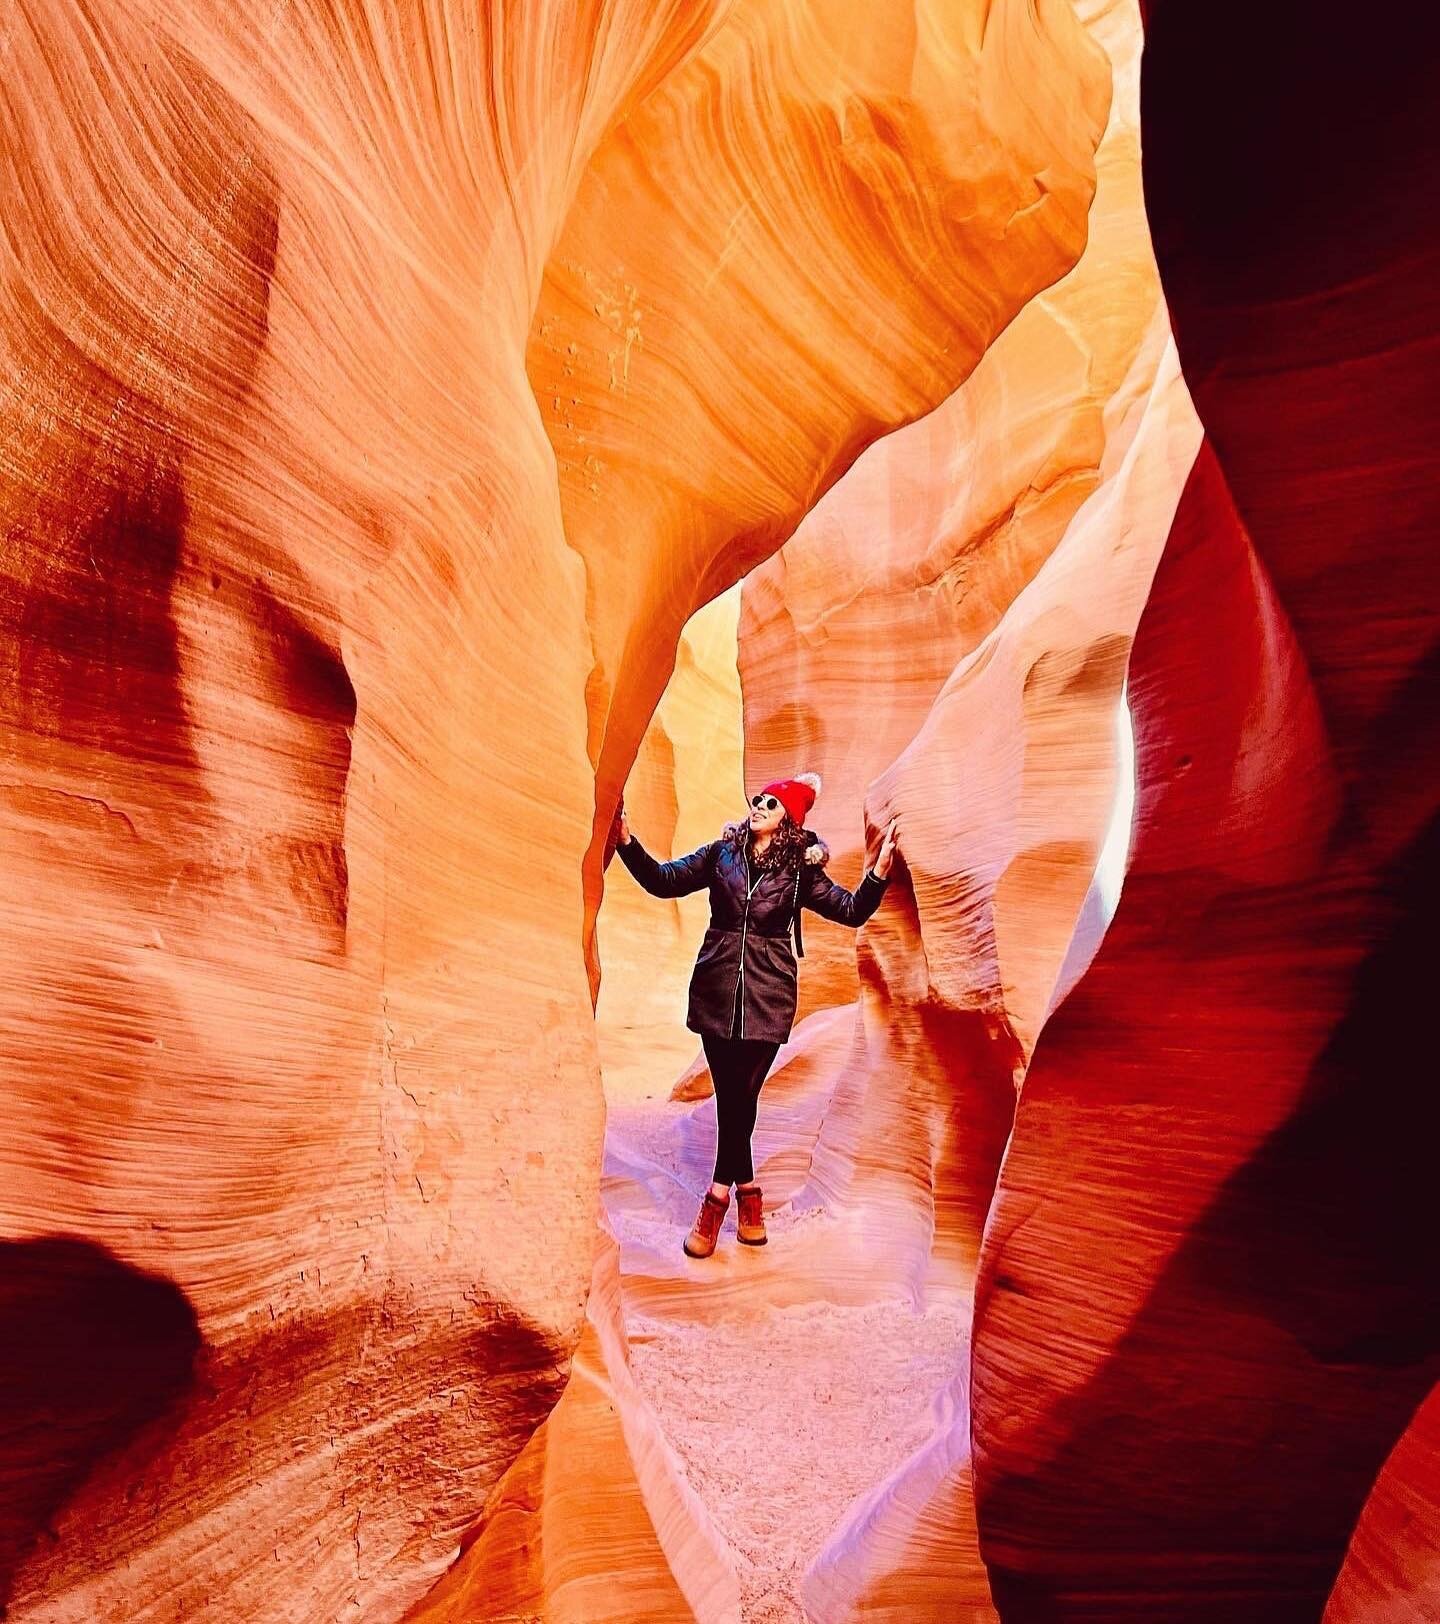 In awe of the mesmerizing sandstone waves at Antelope Canyon. 🥺🧡 Tour by the Navajo Nation 
📸: @fanyphania 

#lowerantelopecanyon #antelopecanyon #arizona #canyon